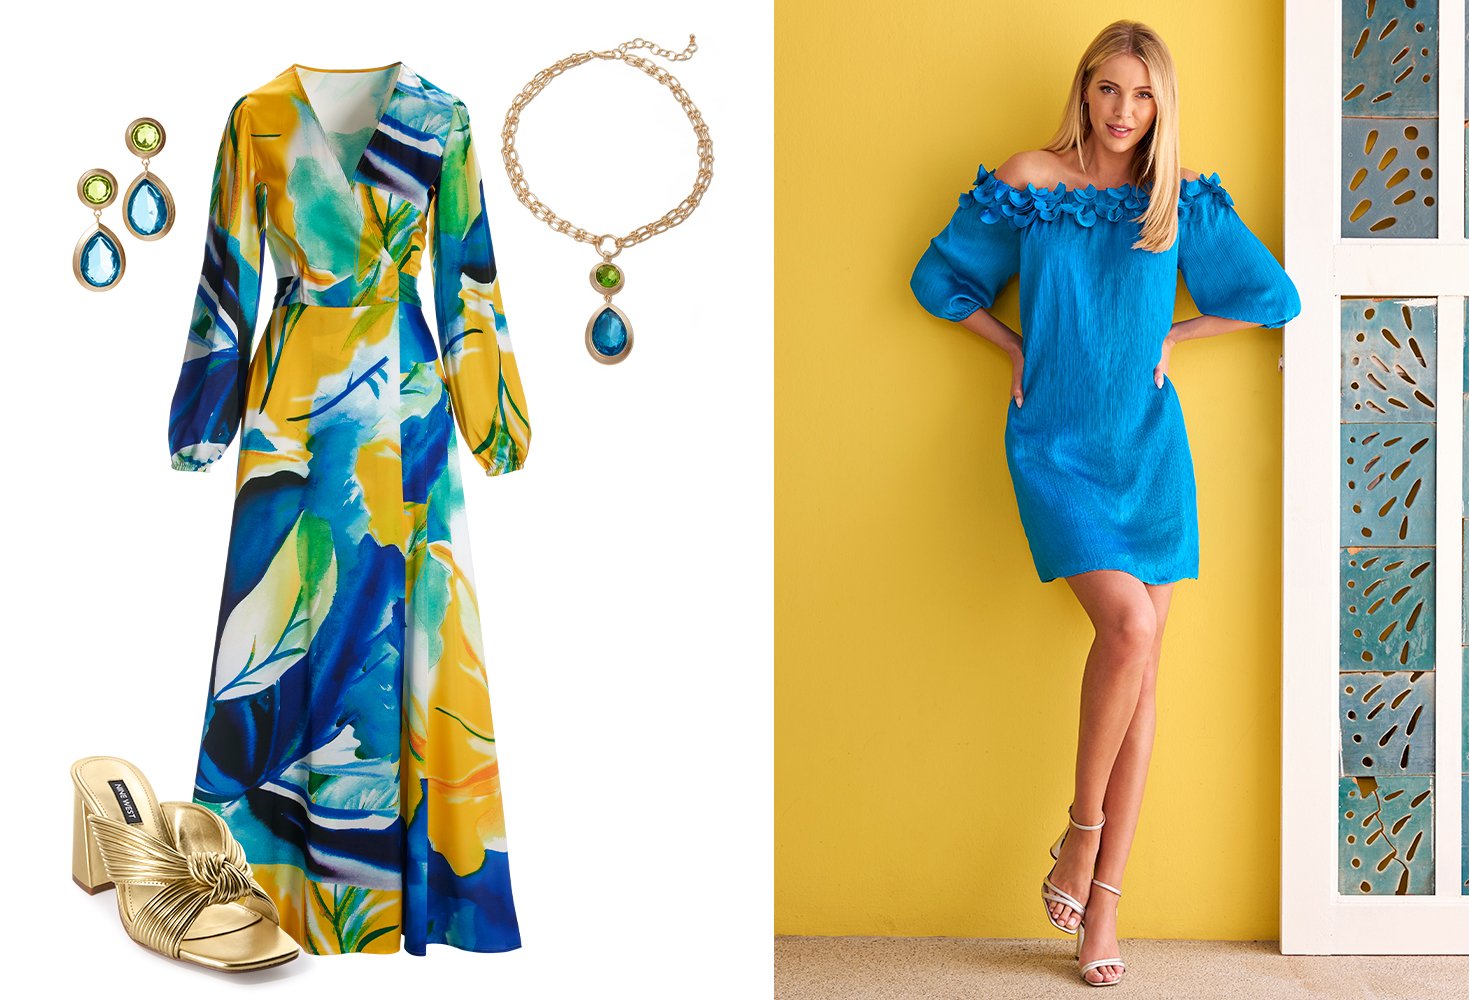 Left panel shows a blue, yellow, and green printed long-sleeve maxi wrap dress, gold knotted block heels, a blue and green jewel necklace plus matching earrings. Right model wearing a blue off-the-shoulder ruffle detail short dress and silver strappy heels.